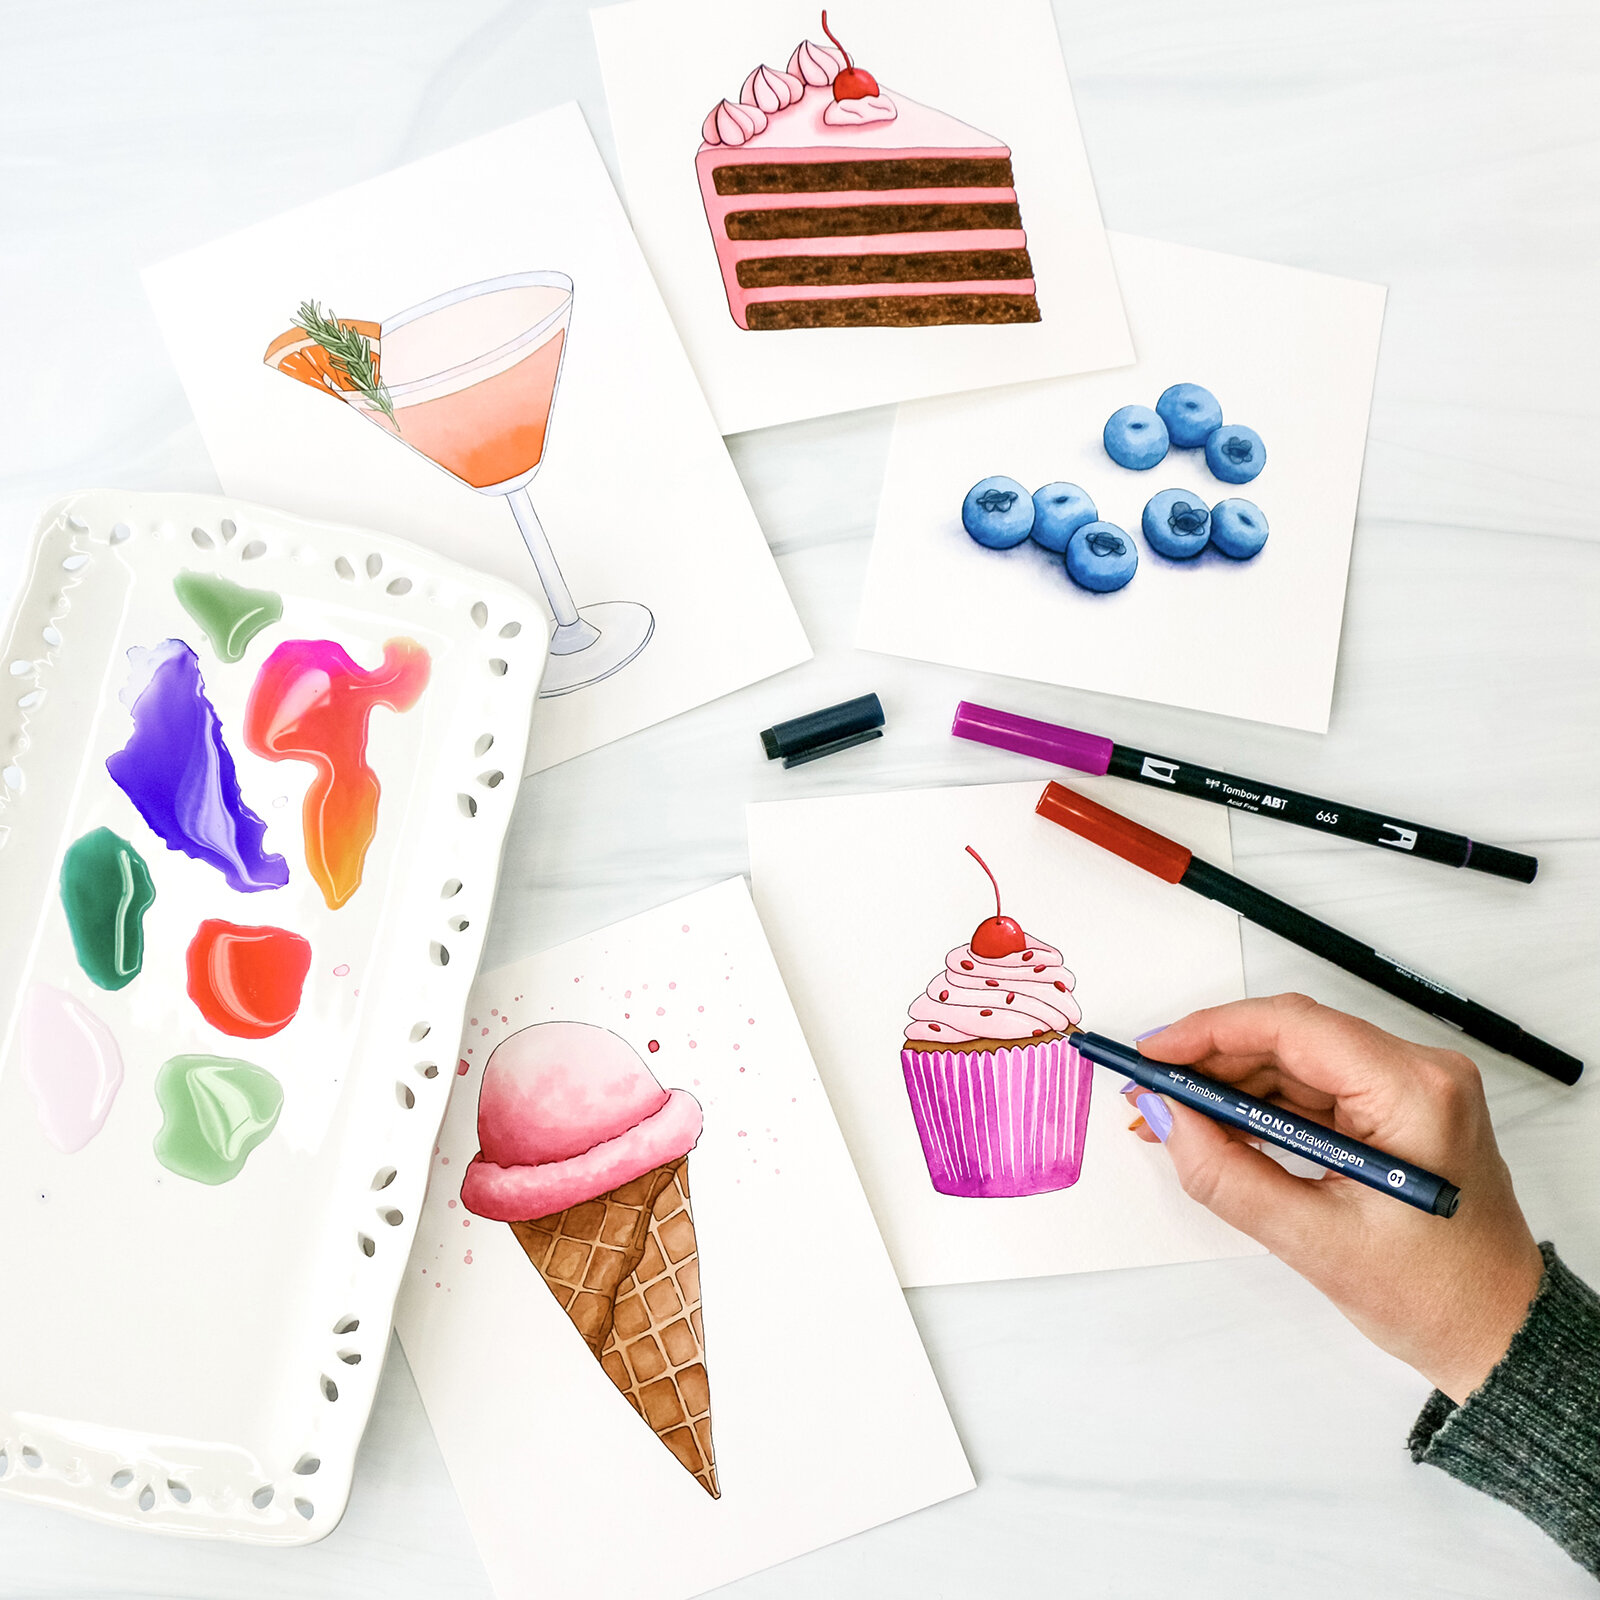 How to Watercolor with Tombow Brush Pens and Rubber Stamps